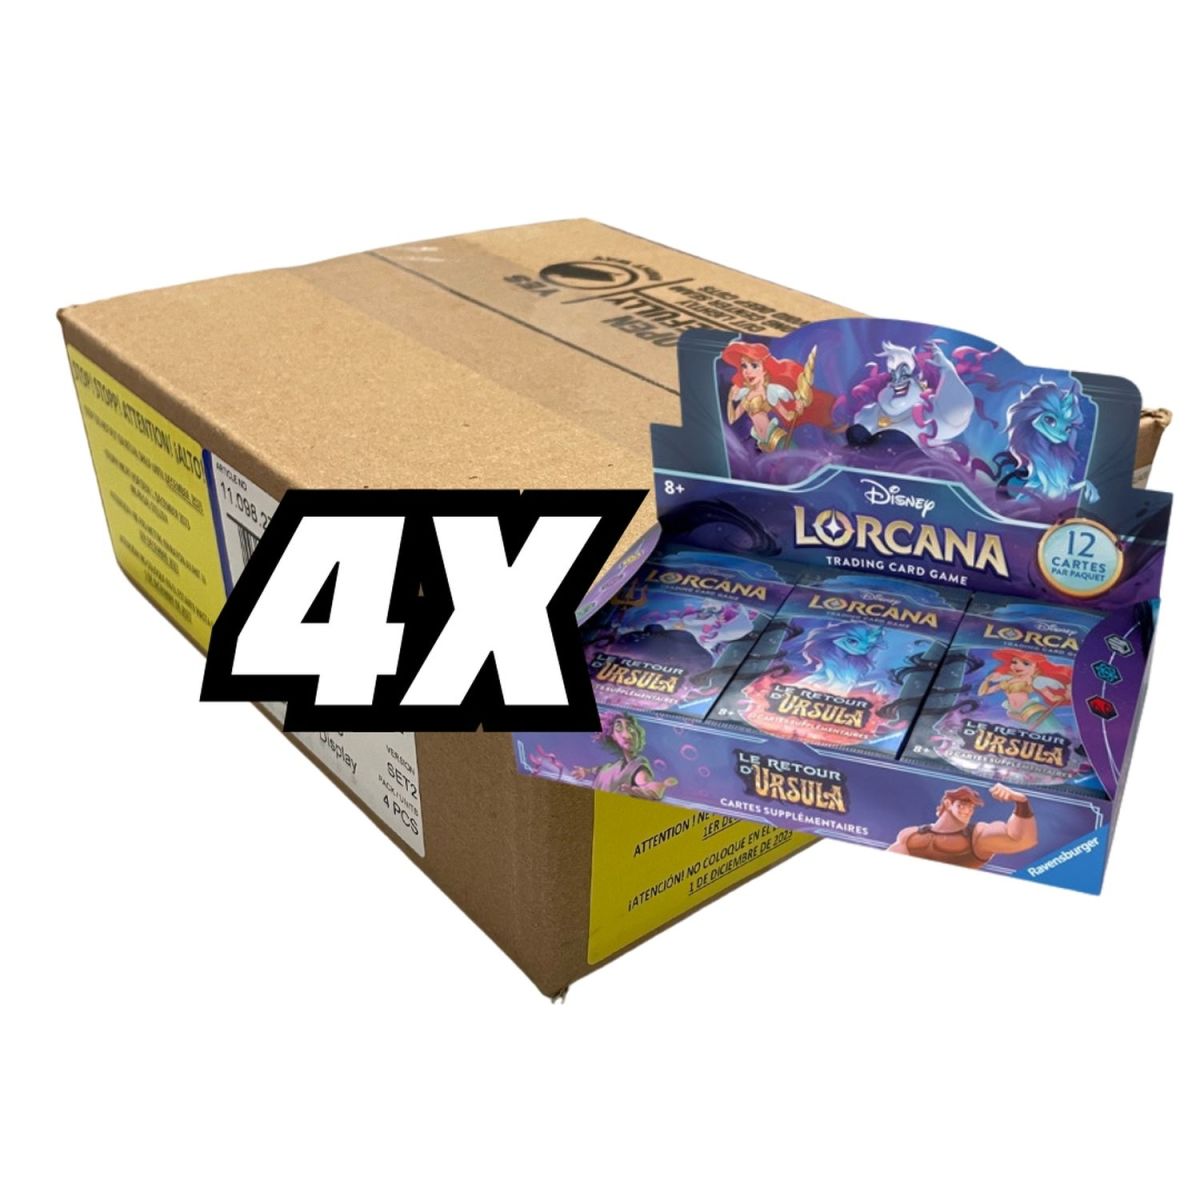 Disney Lorcana - Box of 4 Box of 24 Boosters - Chapter 4 - Ursula Returns - FR